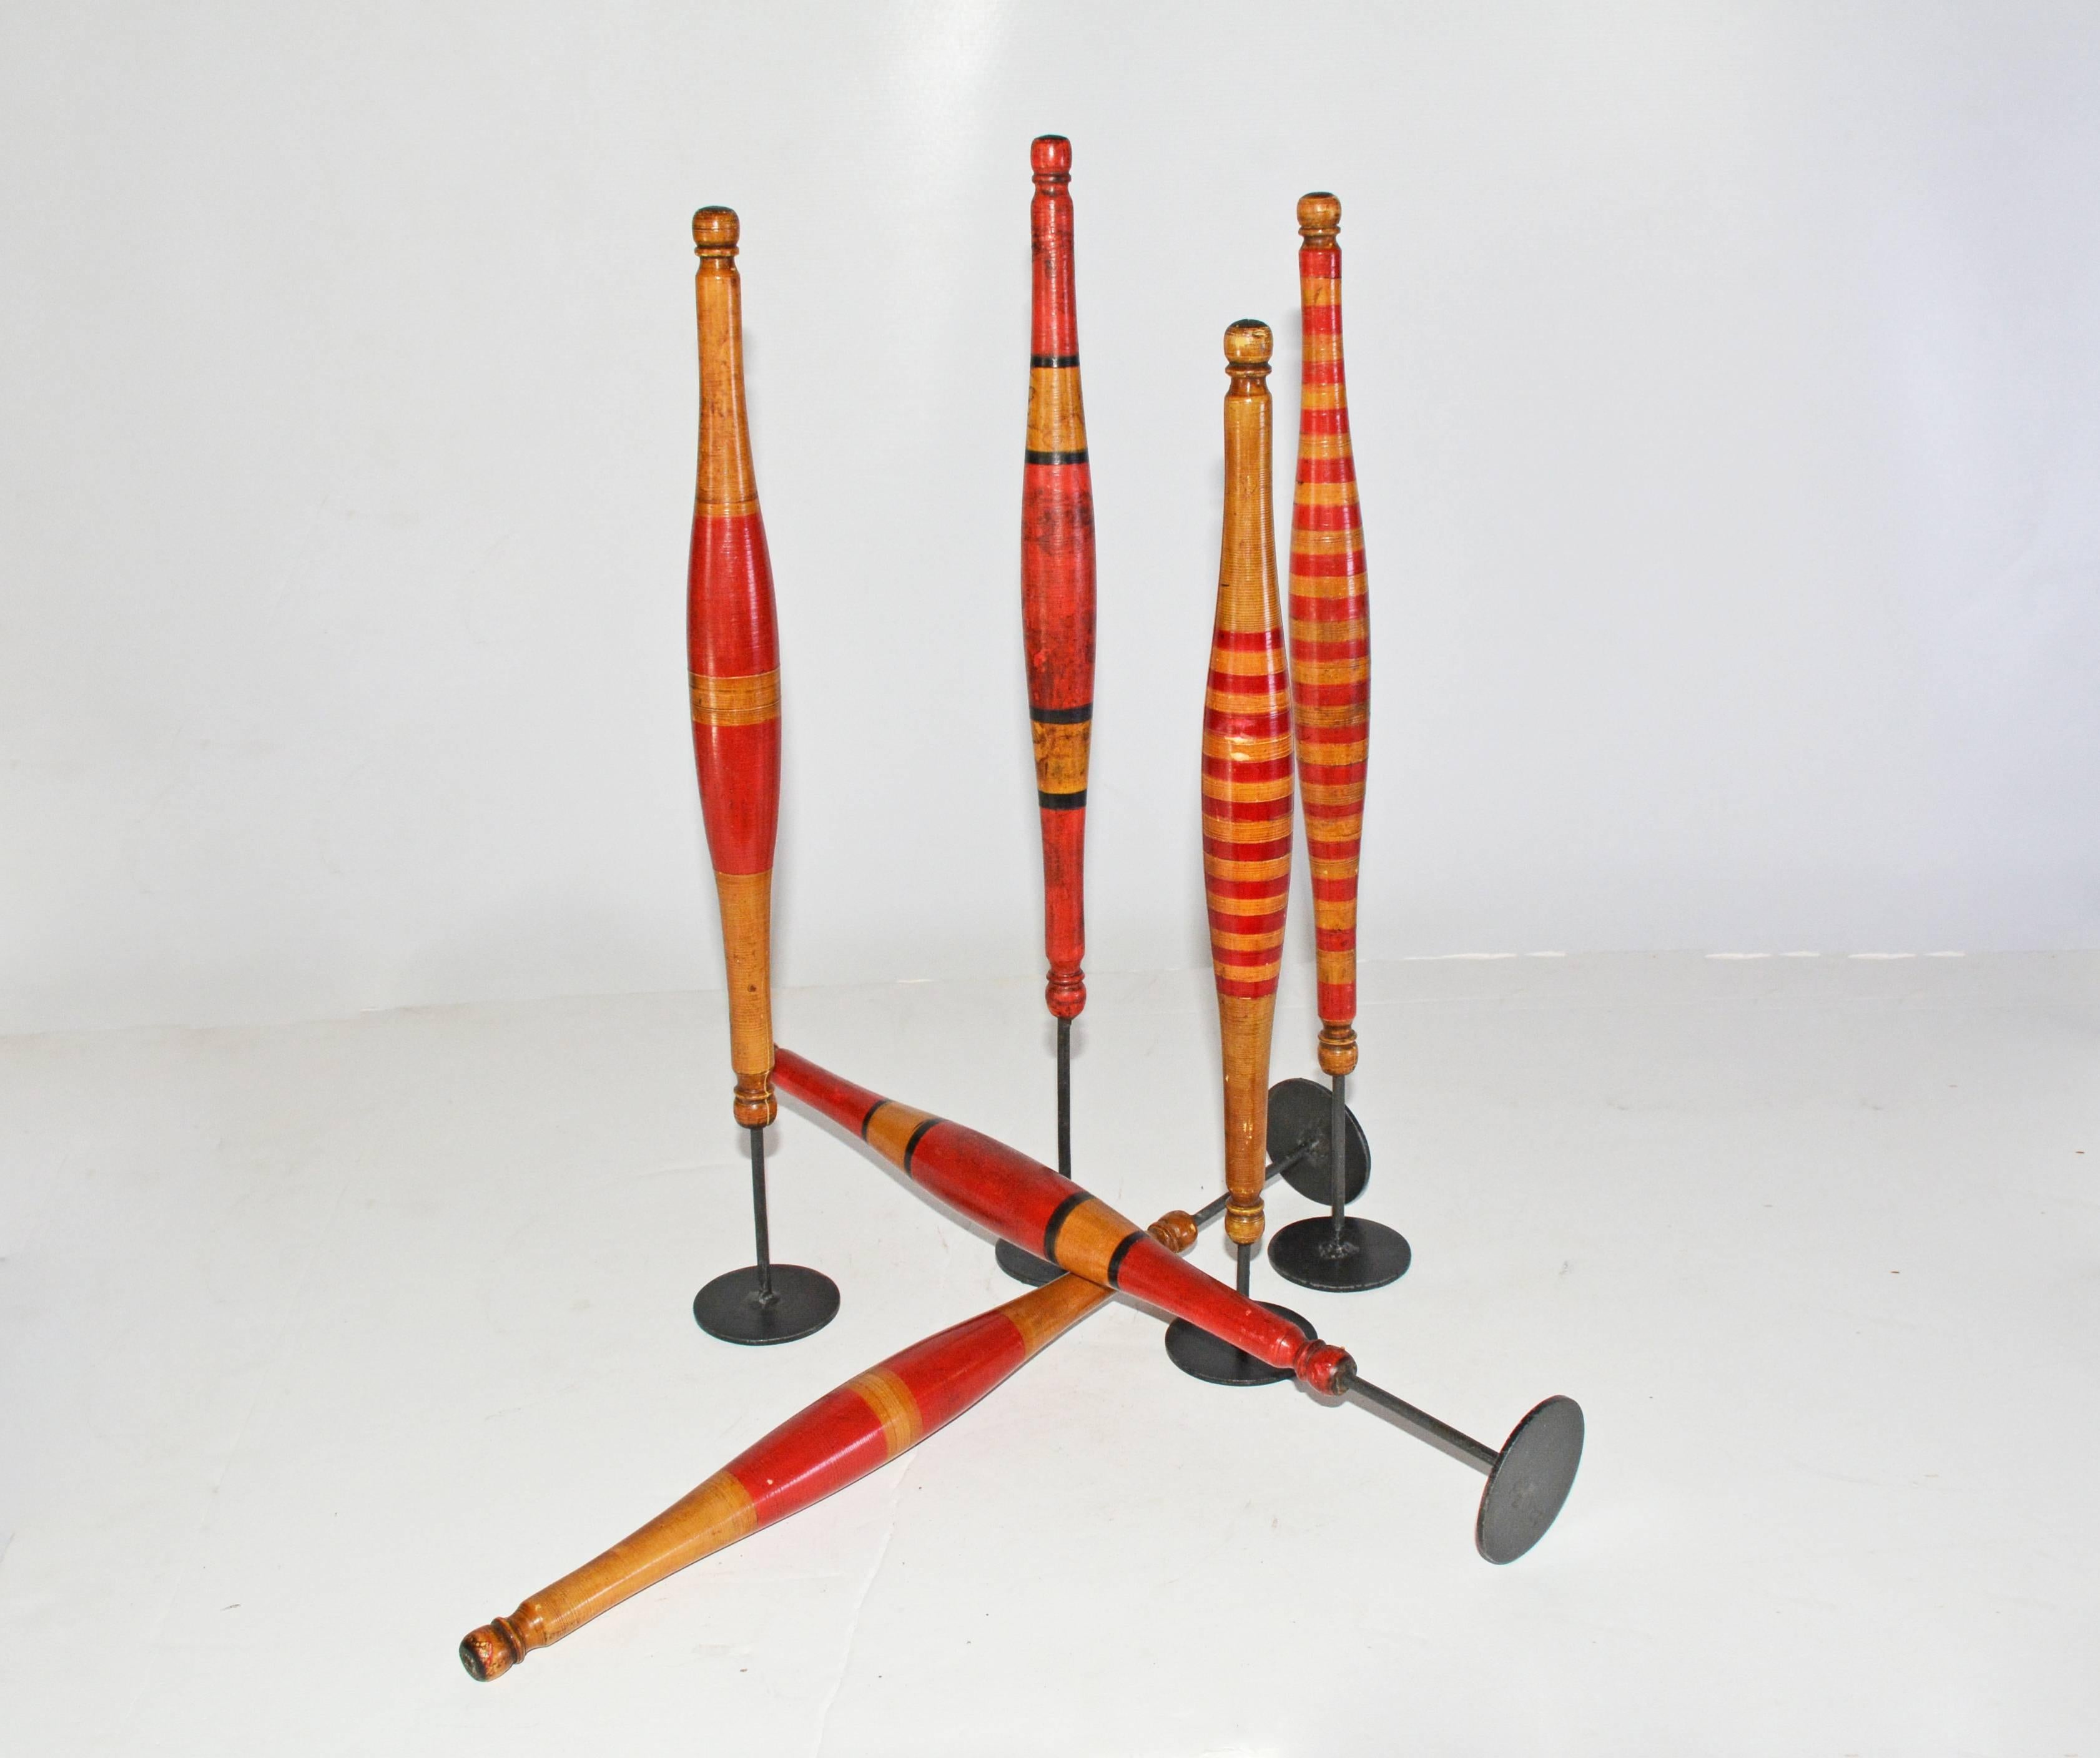 Grouping of six colorful decorative vintage wood spindles are attached to iron stands and are painted in three different patterns. Great as sculptural display.

Measures: Height: 15.13